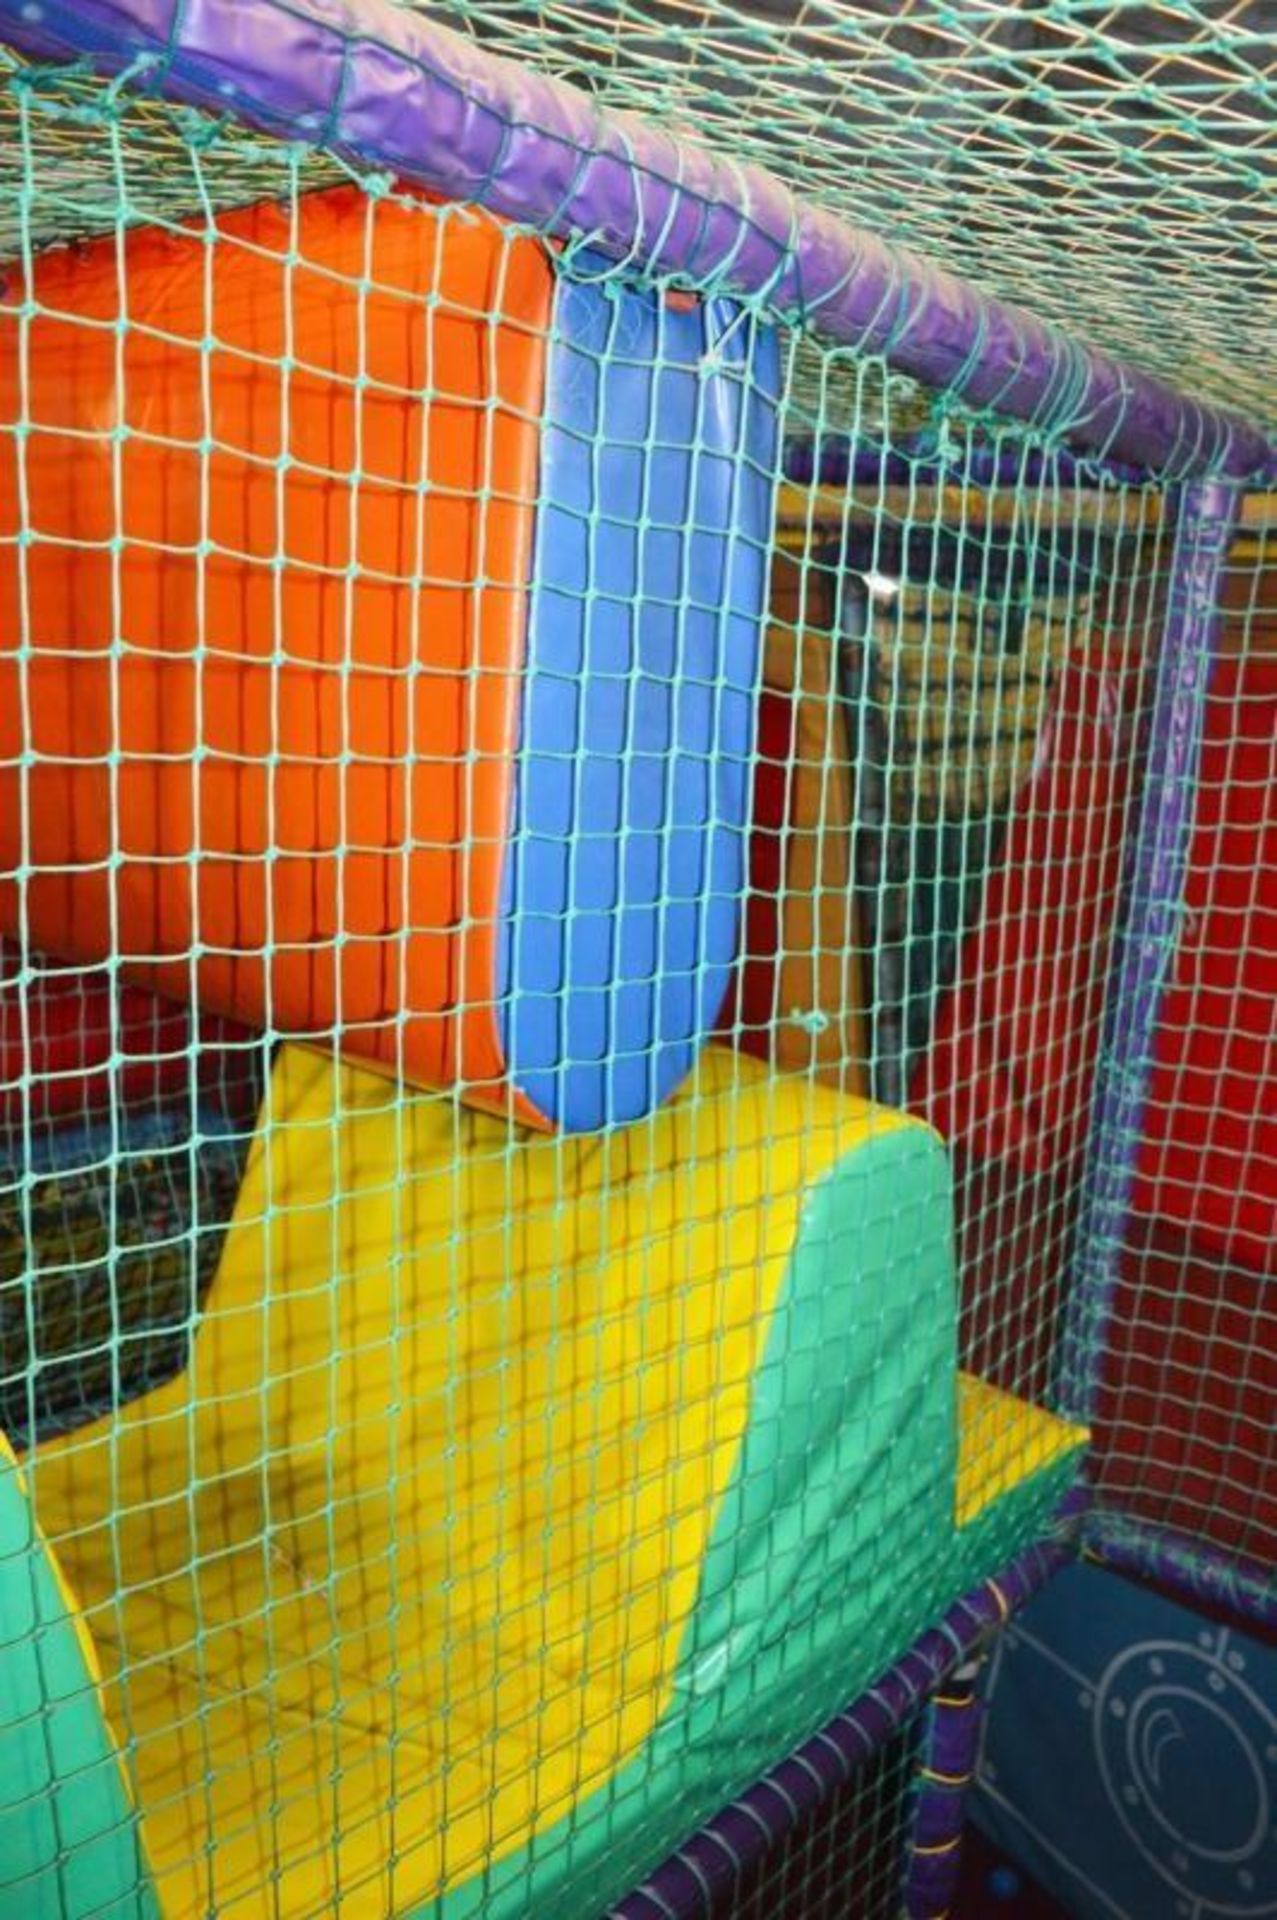 Puddletown Pirates Childrens Play Centre - Features Large Indoor Ball Pit, Huge Amount of Balls, Fun - Image 25 of 30